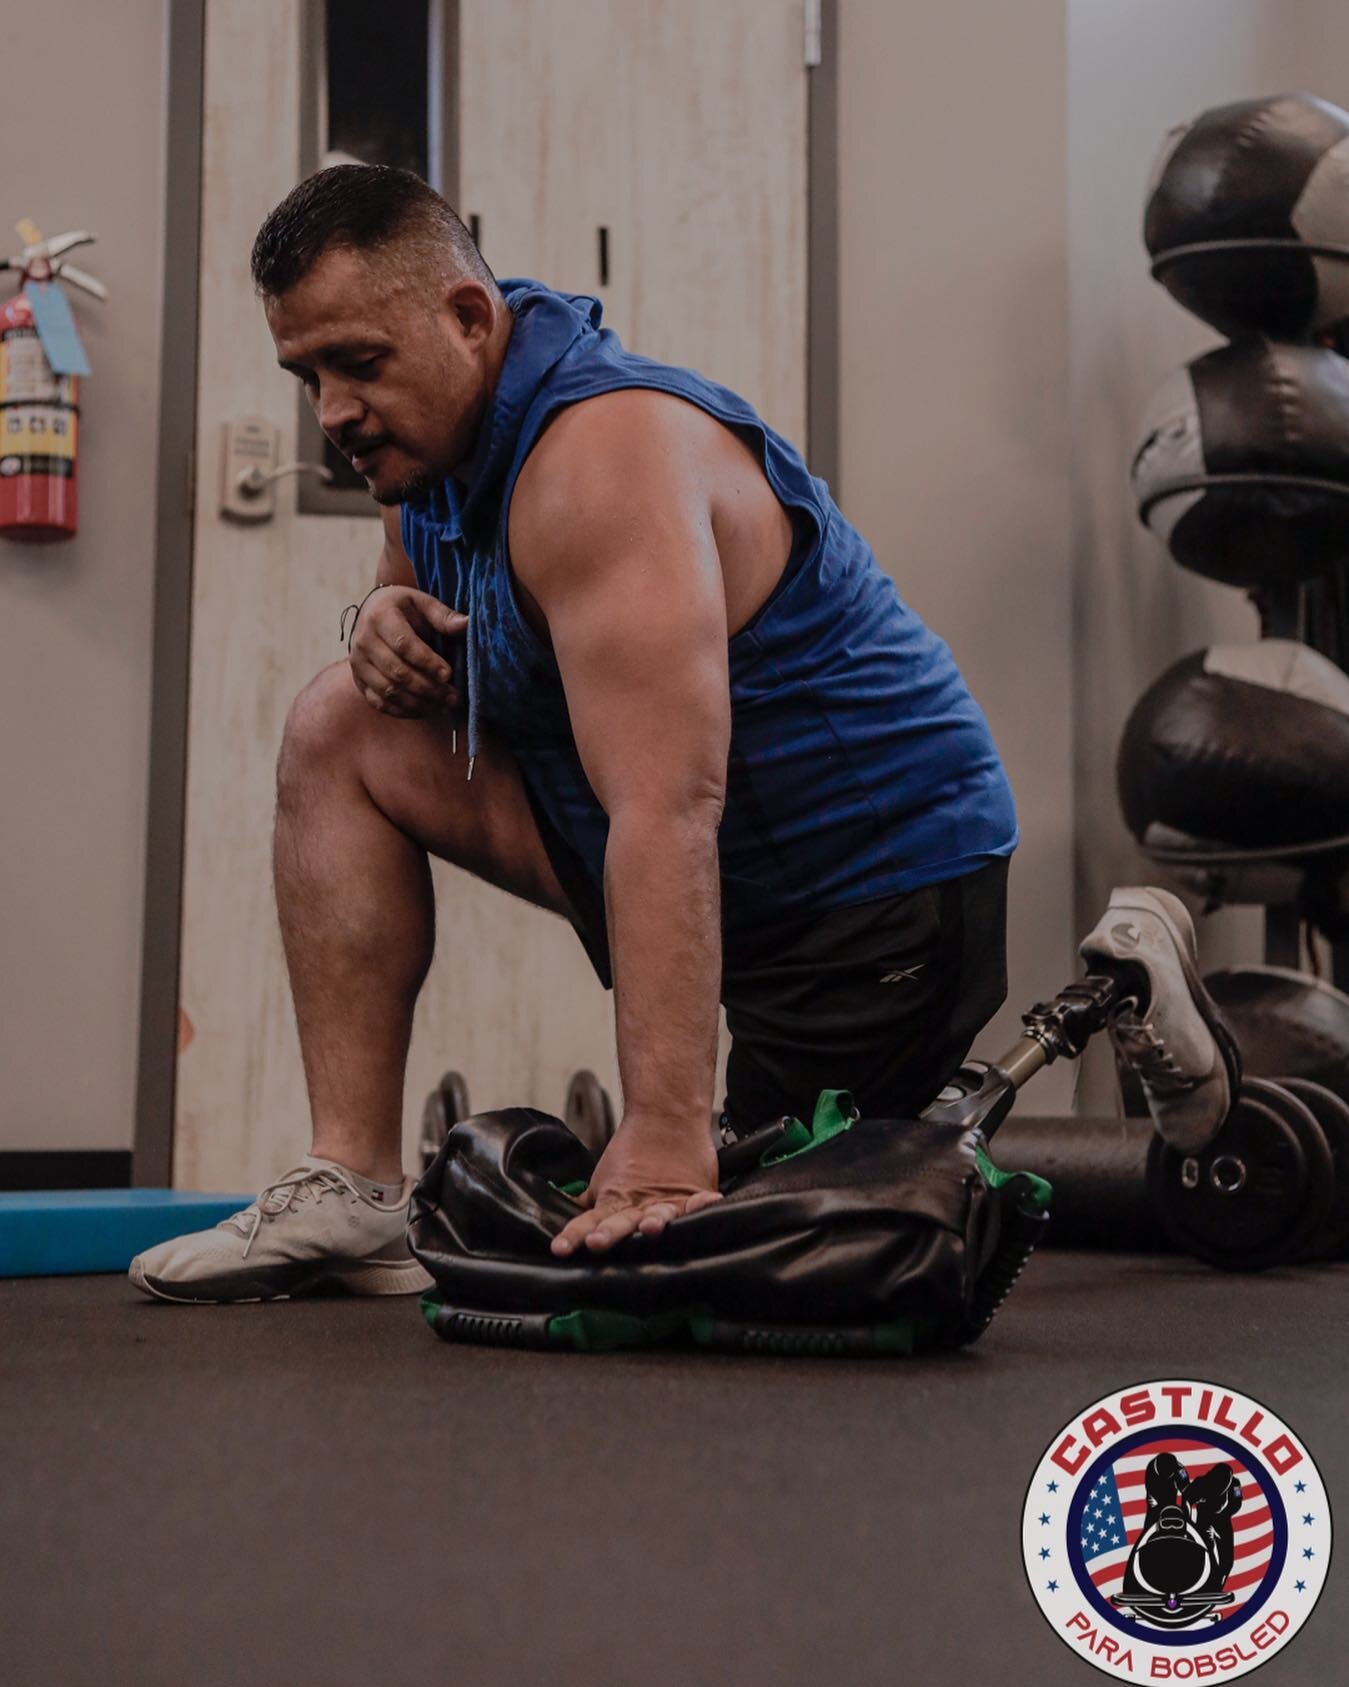 @ramsportsperformance  has been the best personal investment. If you want to get serious about reaching the next level . @poa_orlando and @ramsportsperformance is the place to be. 
Photos and athlete pictures by @santiagoqsda